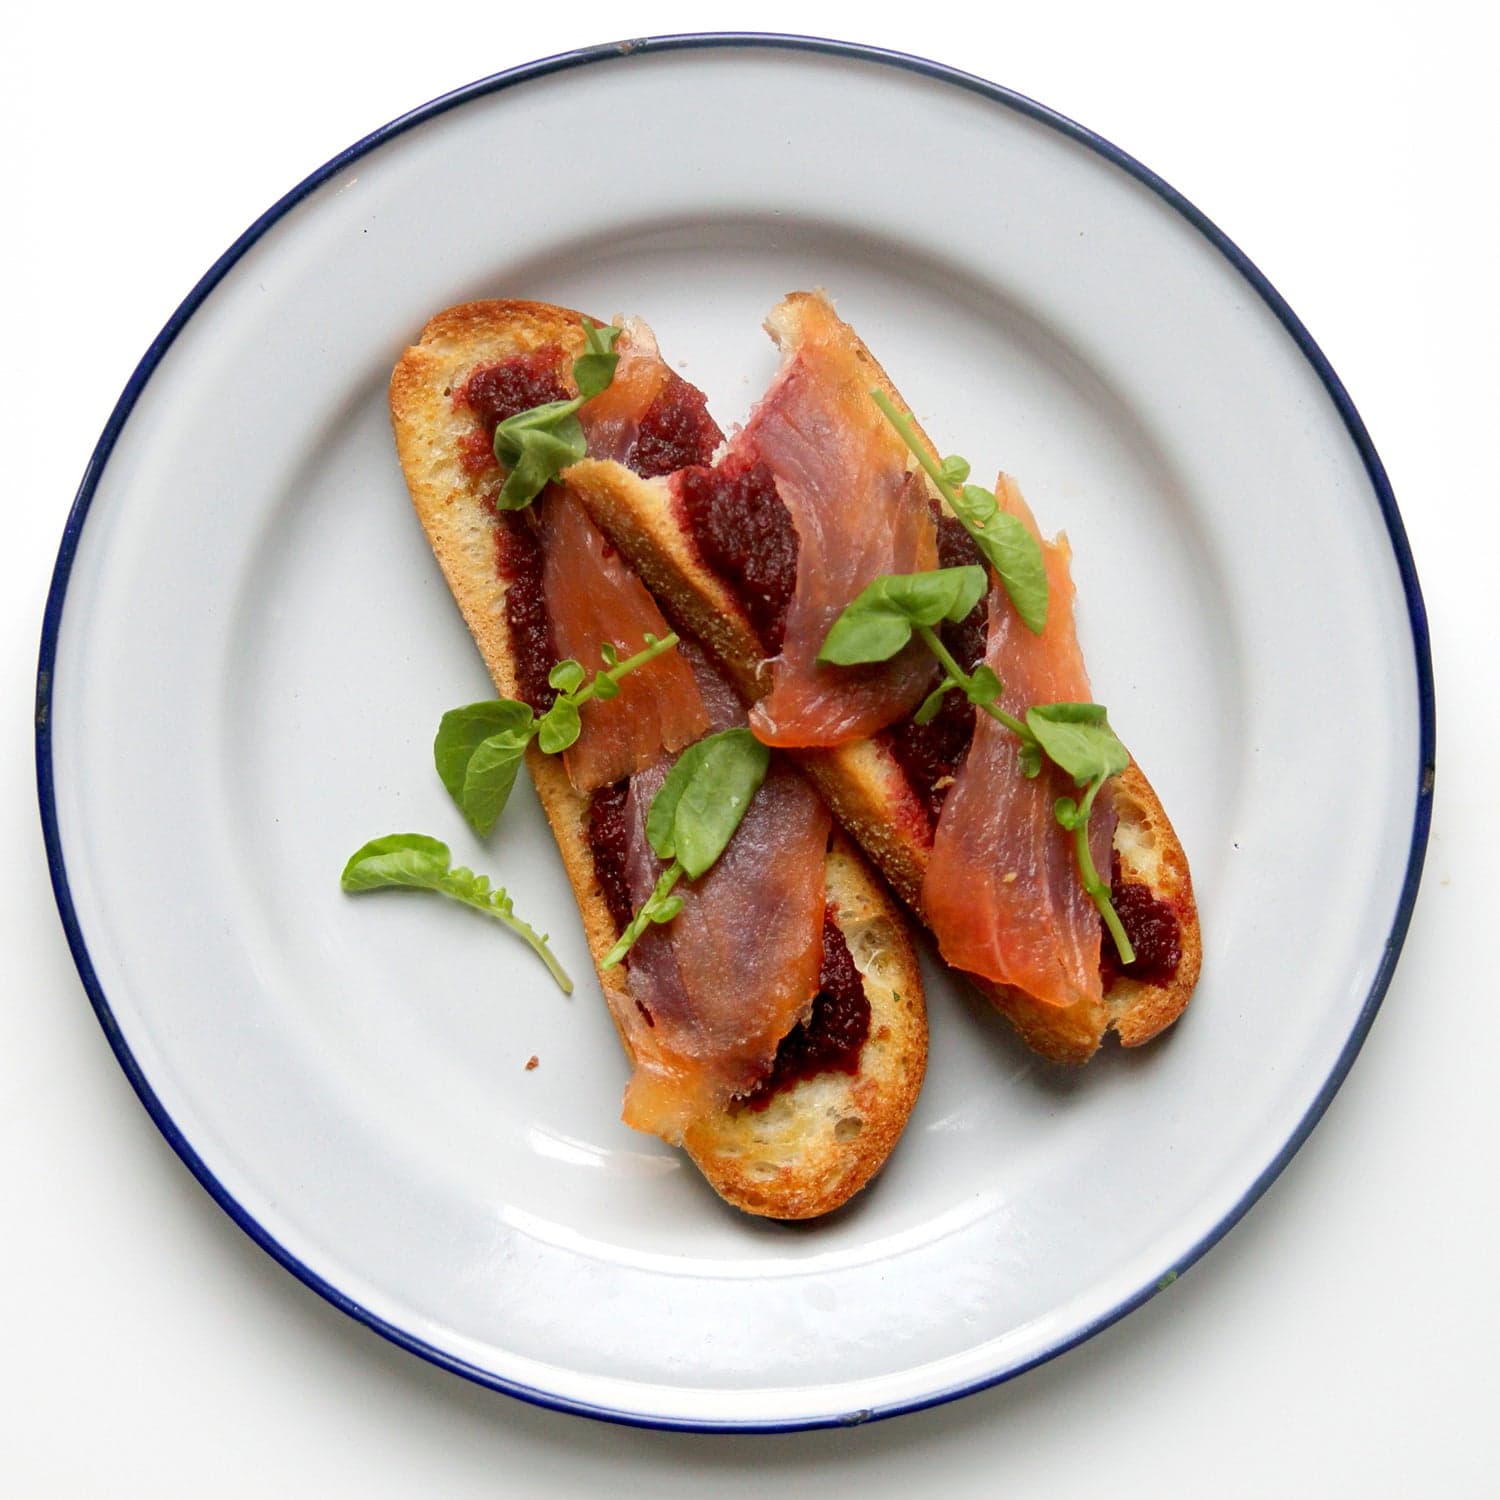 Toast with Roasted Beet Dip, Smoked Salmon, and Watercress